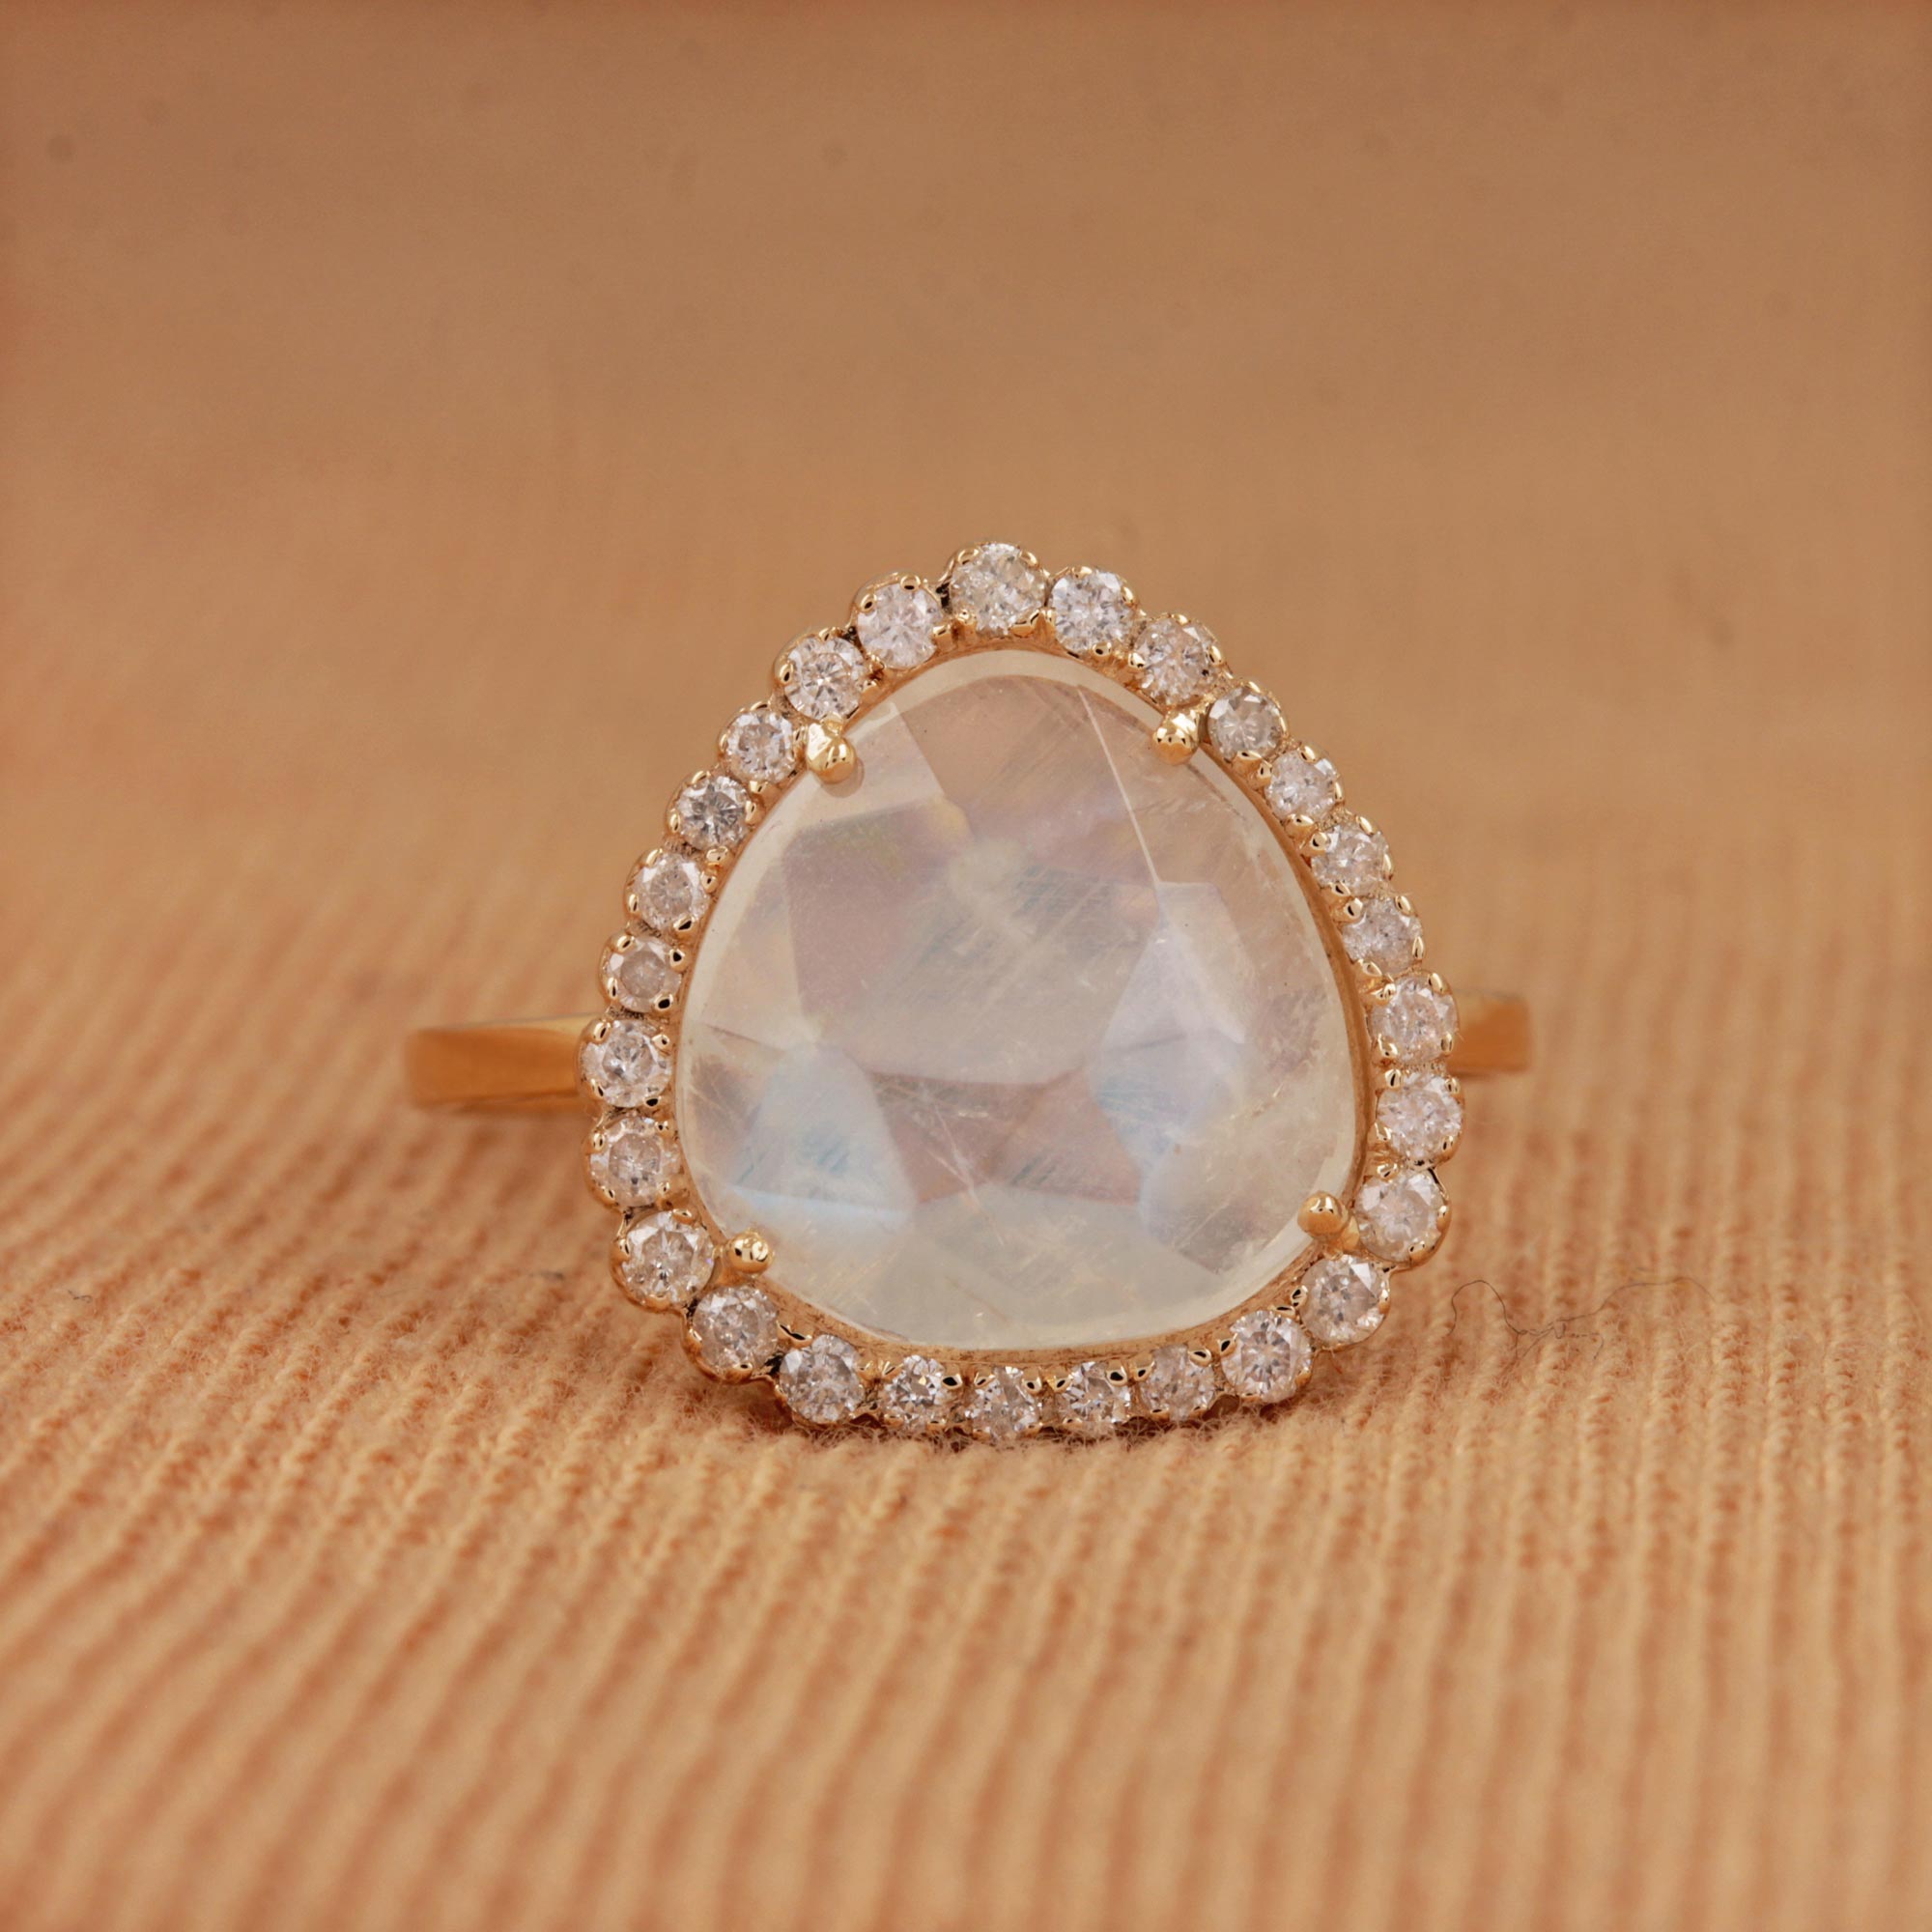 Moonstone 14K Solid Gold Ring Pave Diamond Fine Jewelry